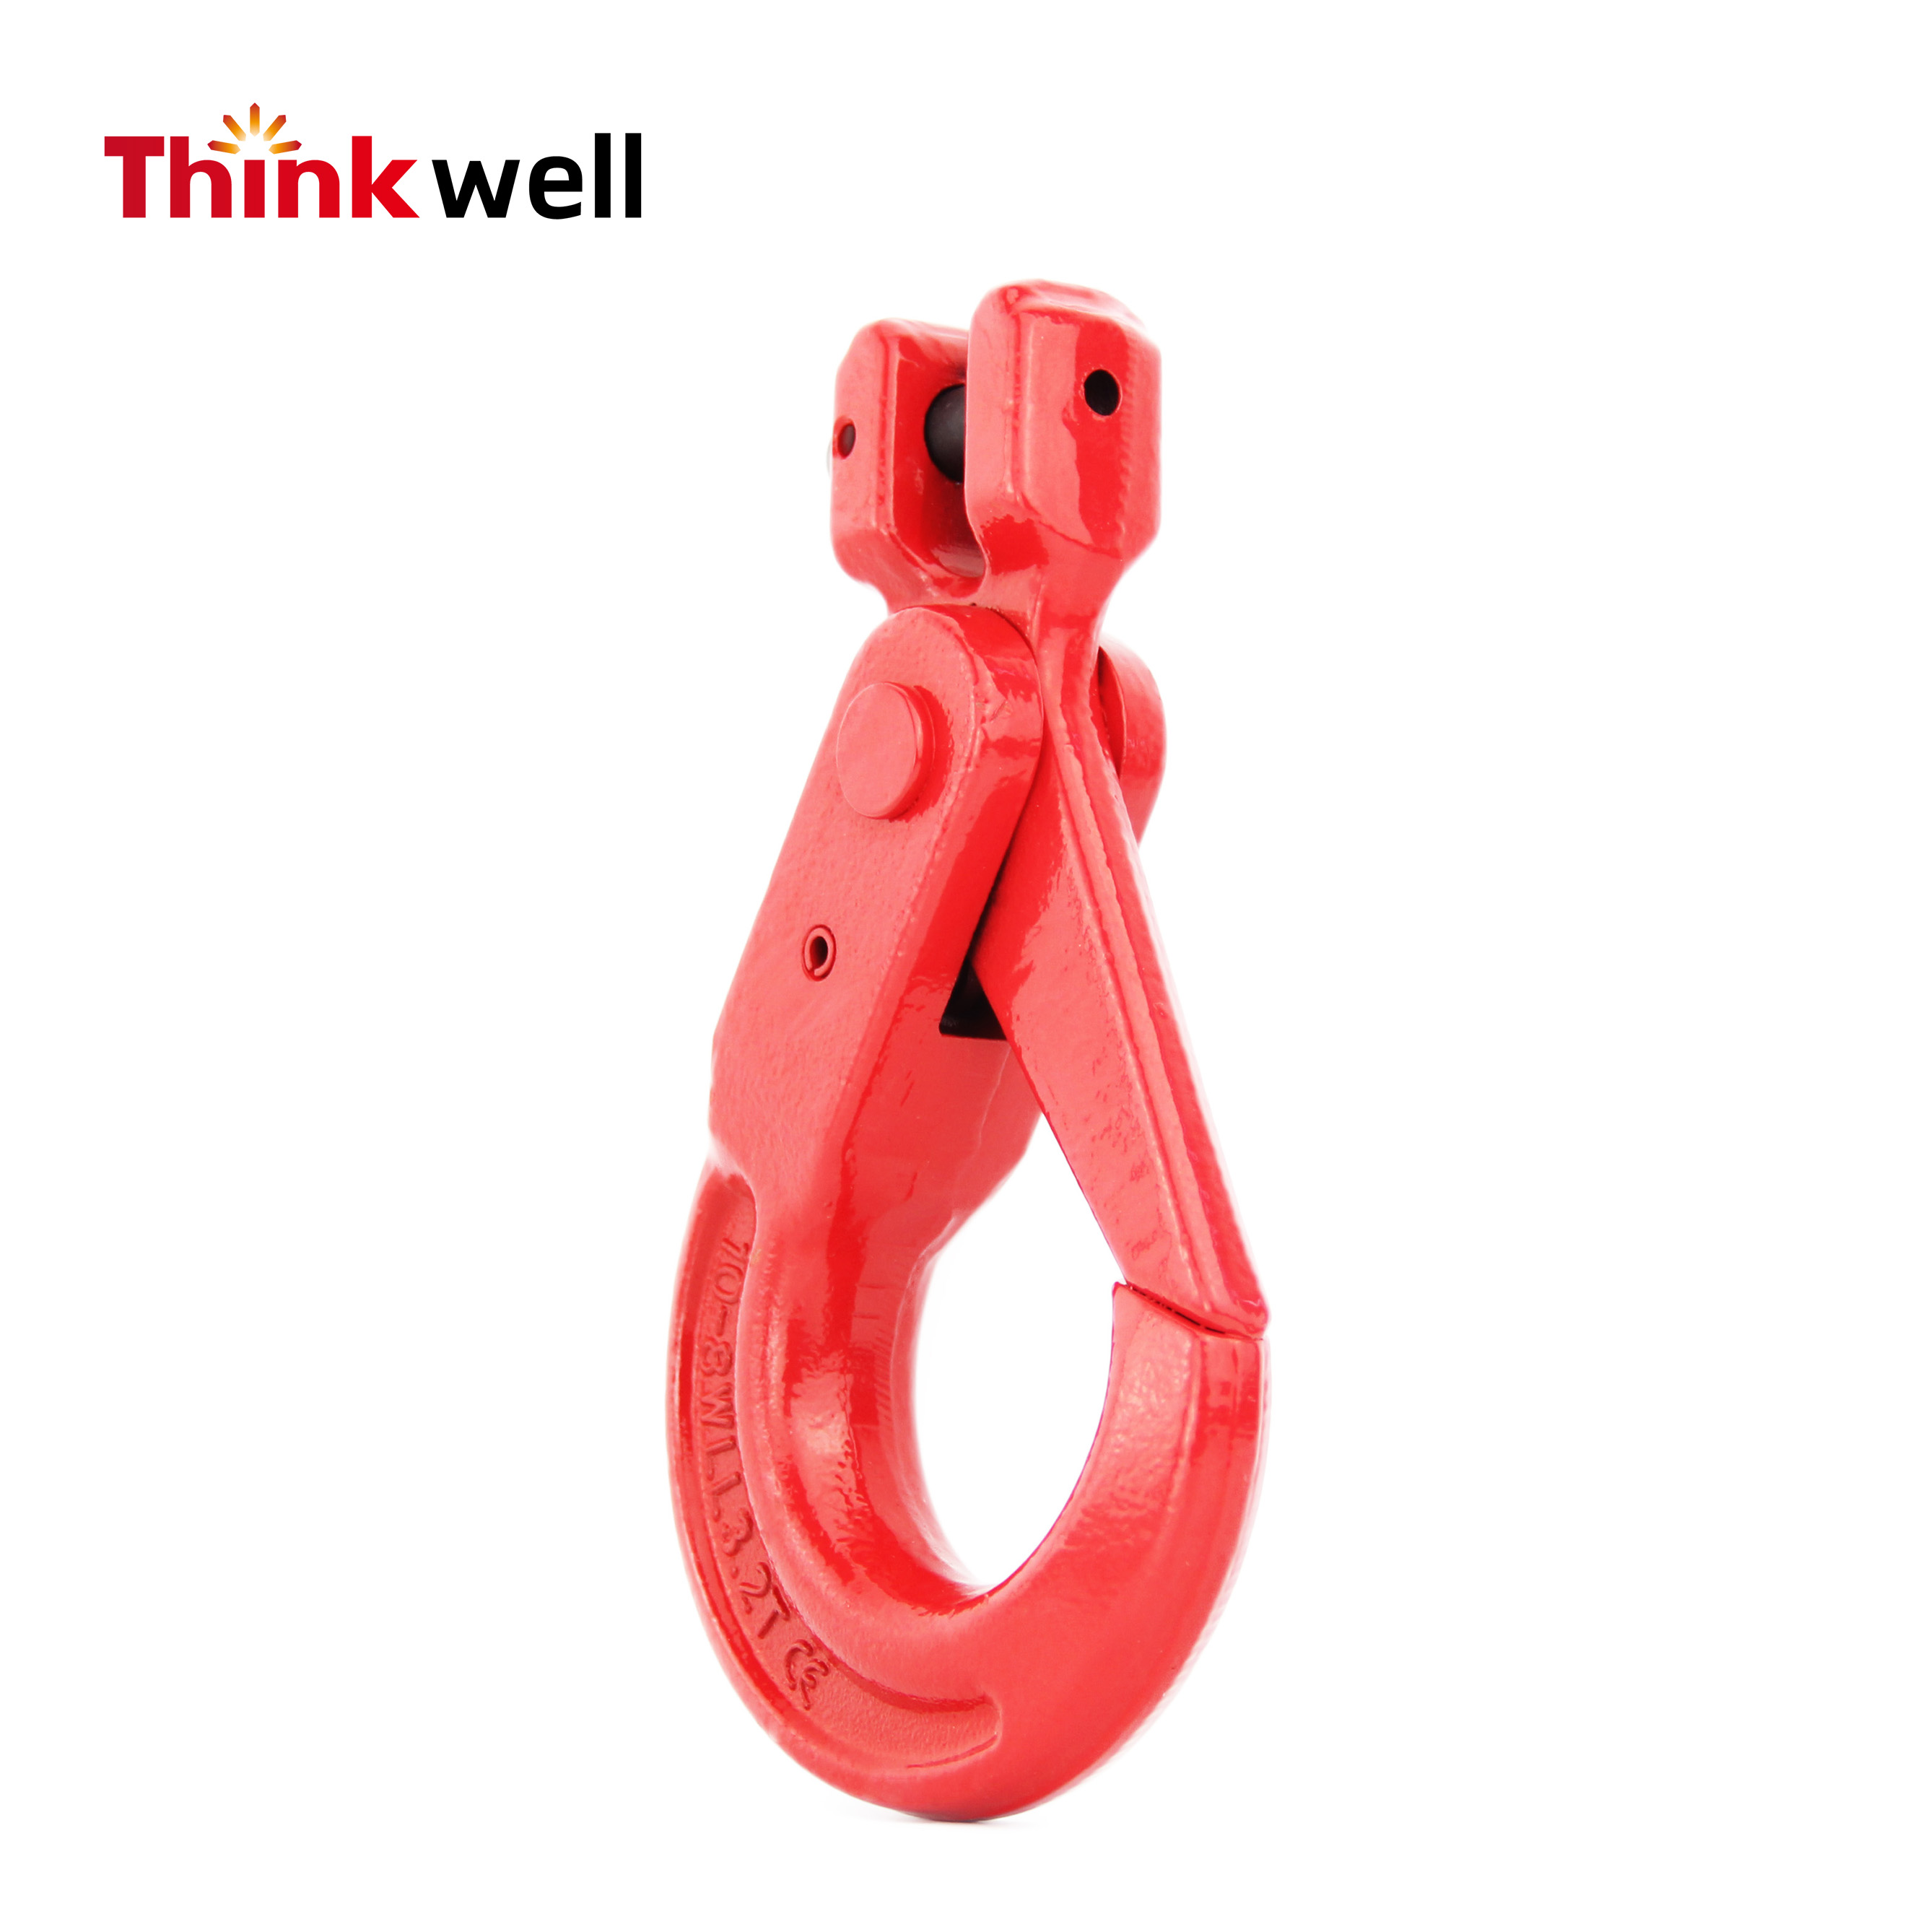 ISO Cetificated Rigging Hardware G80 Clevis Eye Swivel Hook